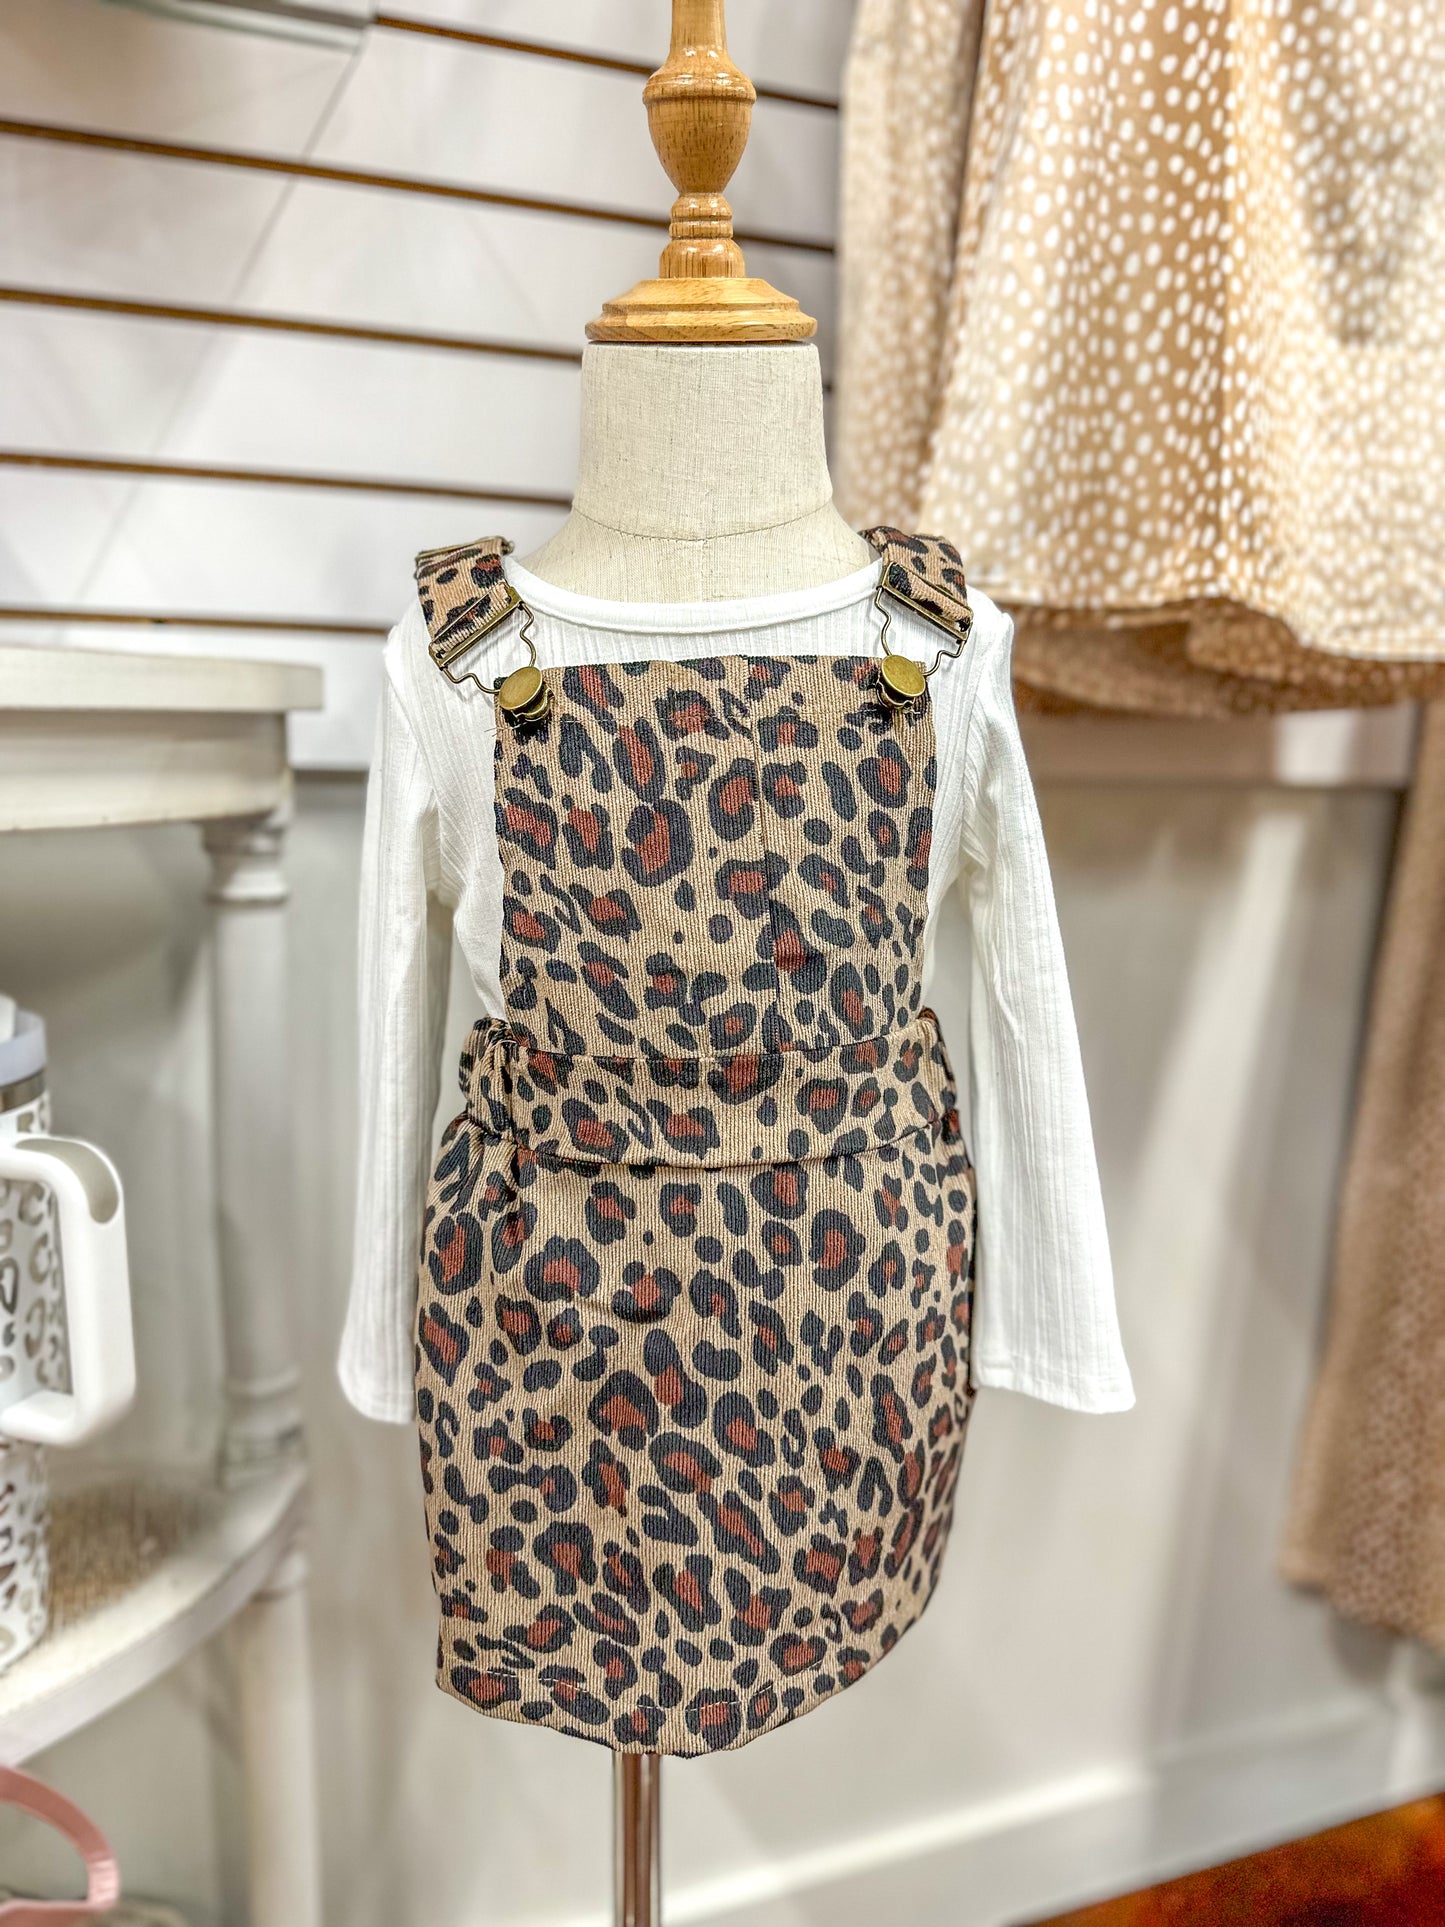 Little Leopard Lady Overall Dress